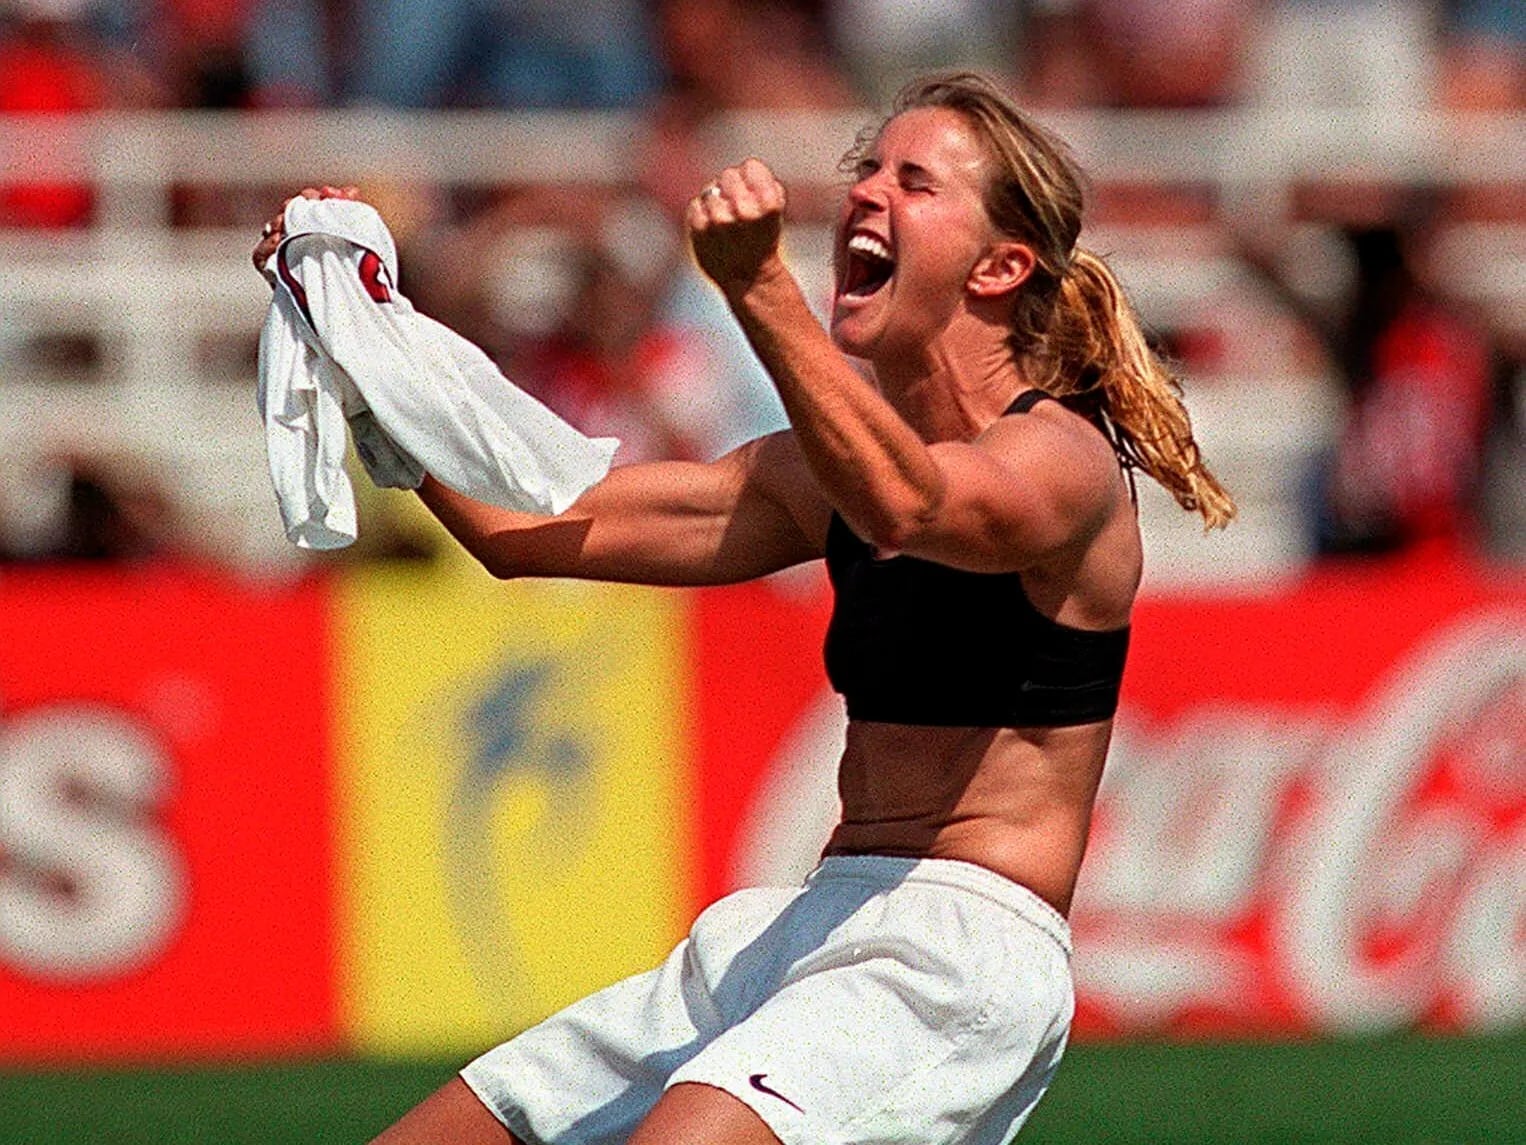 The U.S.'s Brandi Chastain reacts to her winning penalty kick that won the 1999 World Cup for the U.S. national team in their game against China in the Rose Bowl in Pasadena, Calif., on Saturday, July 10, 1999.